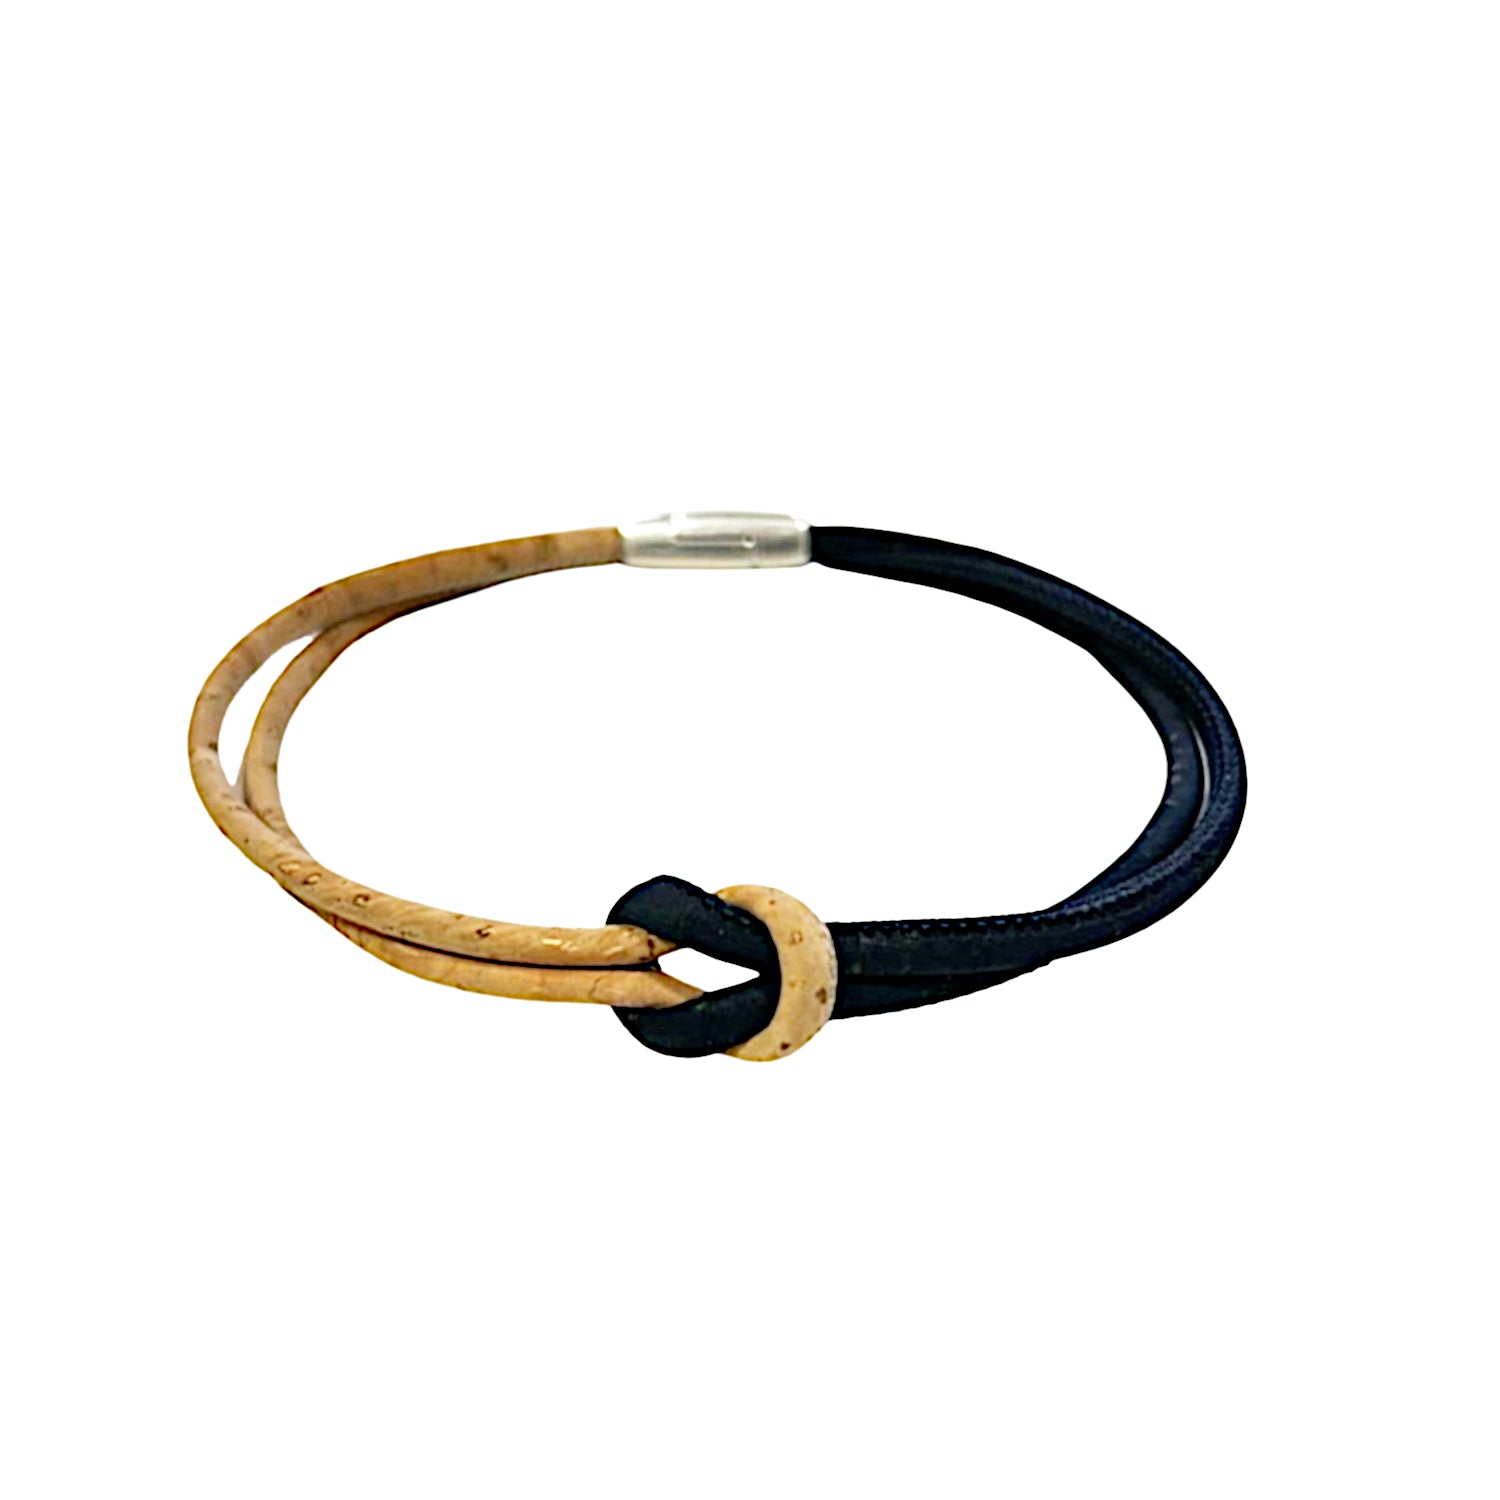 Cork Simple Knot (bracelet) - Cork and Company | Made in Portugal | Vegan Eco-Friendly Fashion